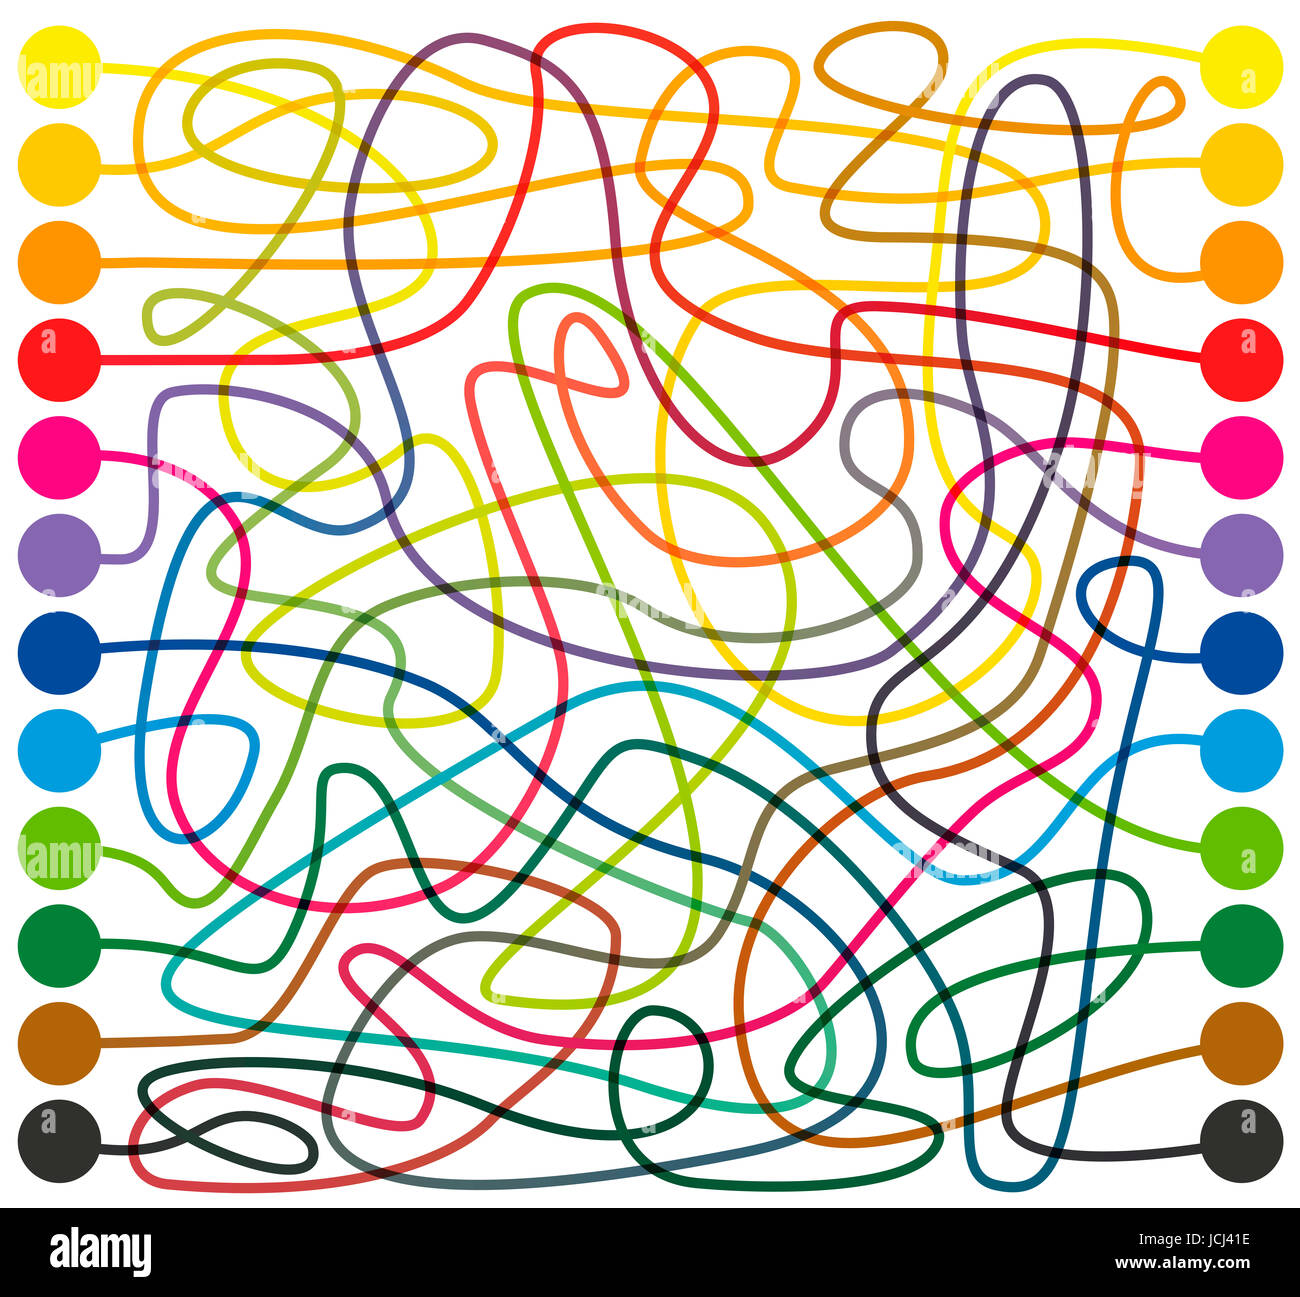 Labyrinth, colored lines - connect the colored dots, find the right way through the tangled colorful maze from one end to the other. Stock Photo